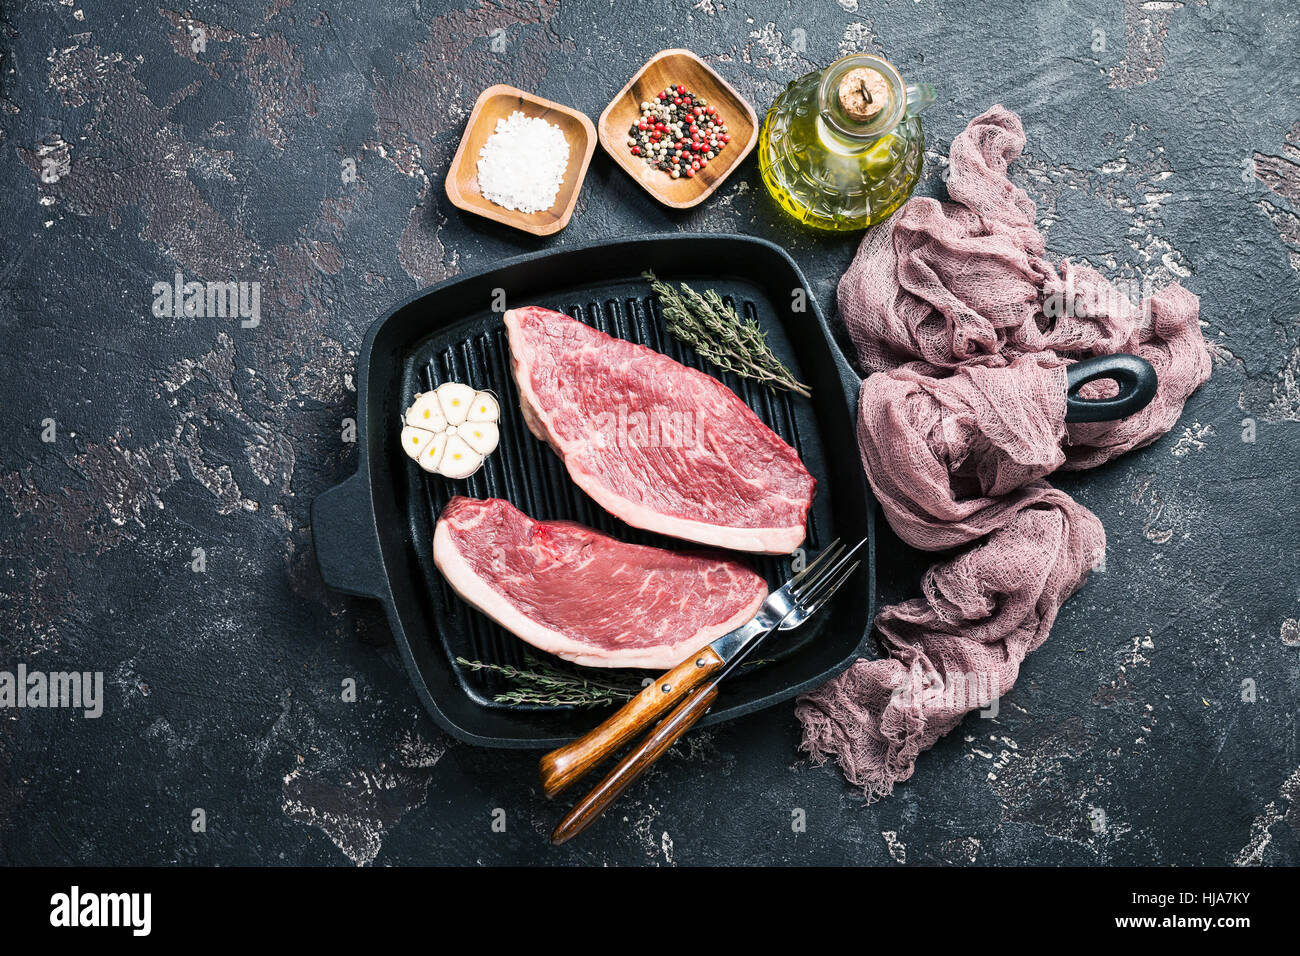 Fresh raw Prime Black Angus beef strip steaks on grill pan over dark rustic concrete background, top view. Ingredients set for making healthy dinner. Stock Photo